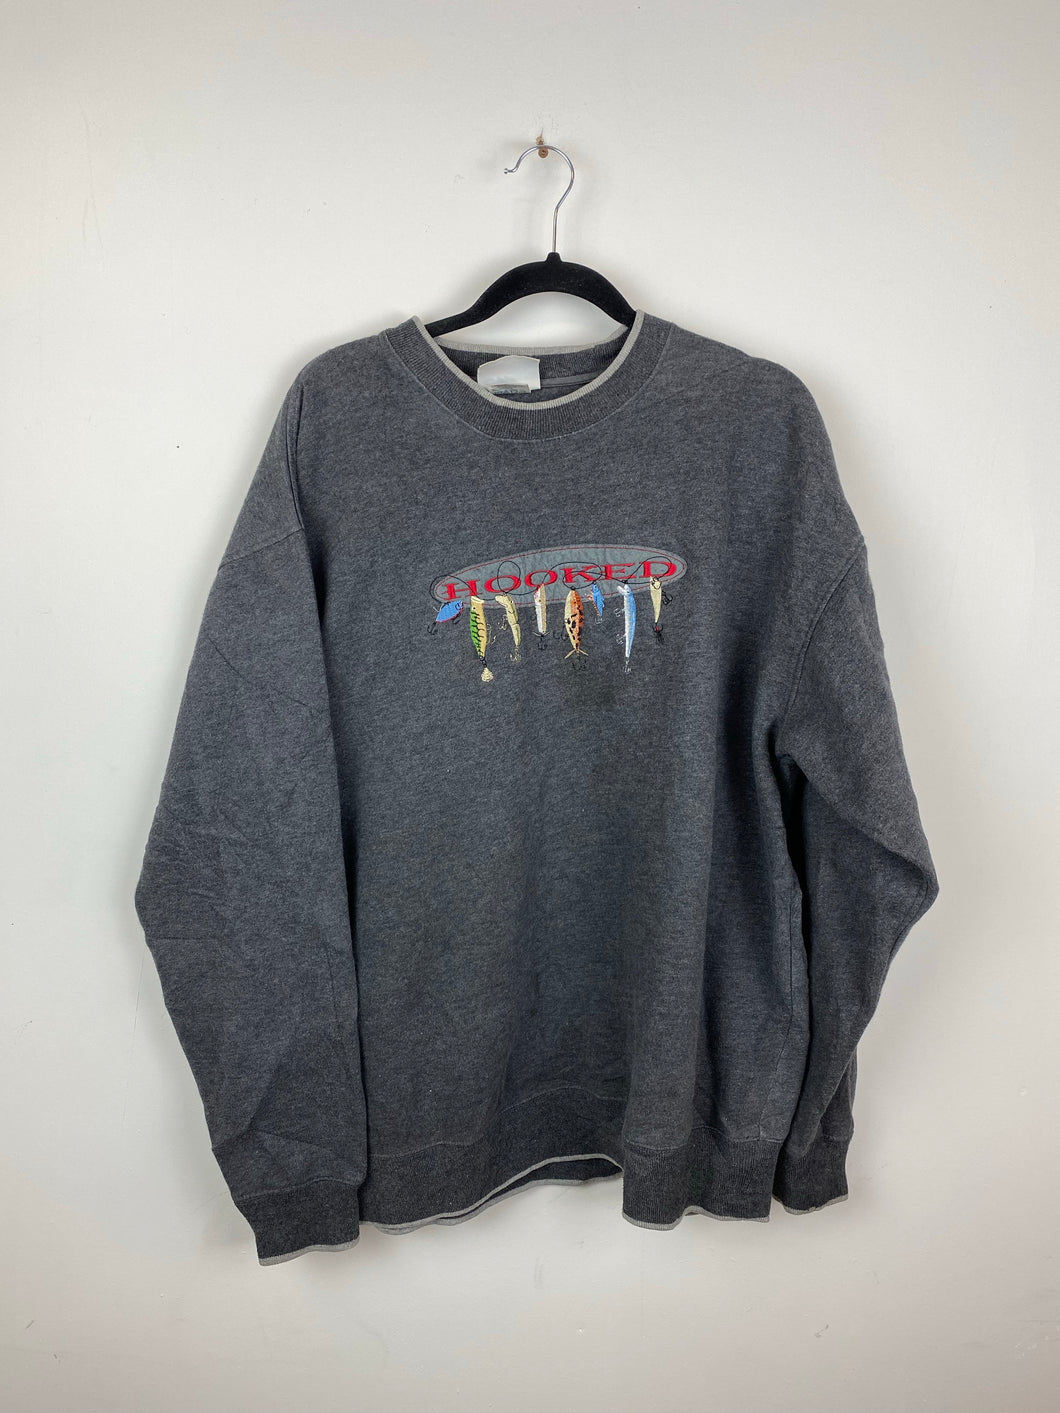 Embroidered Hooked fishing crewneck